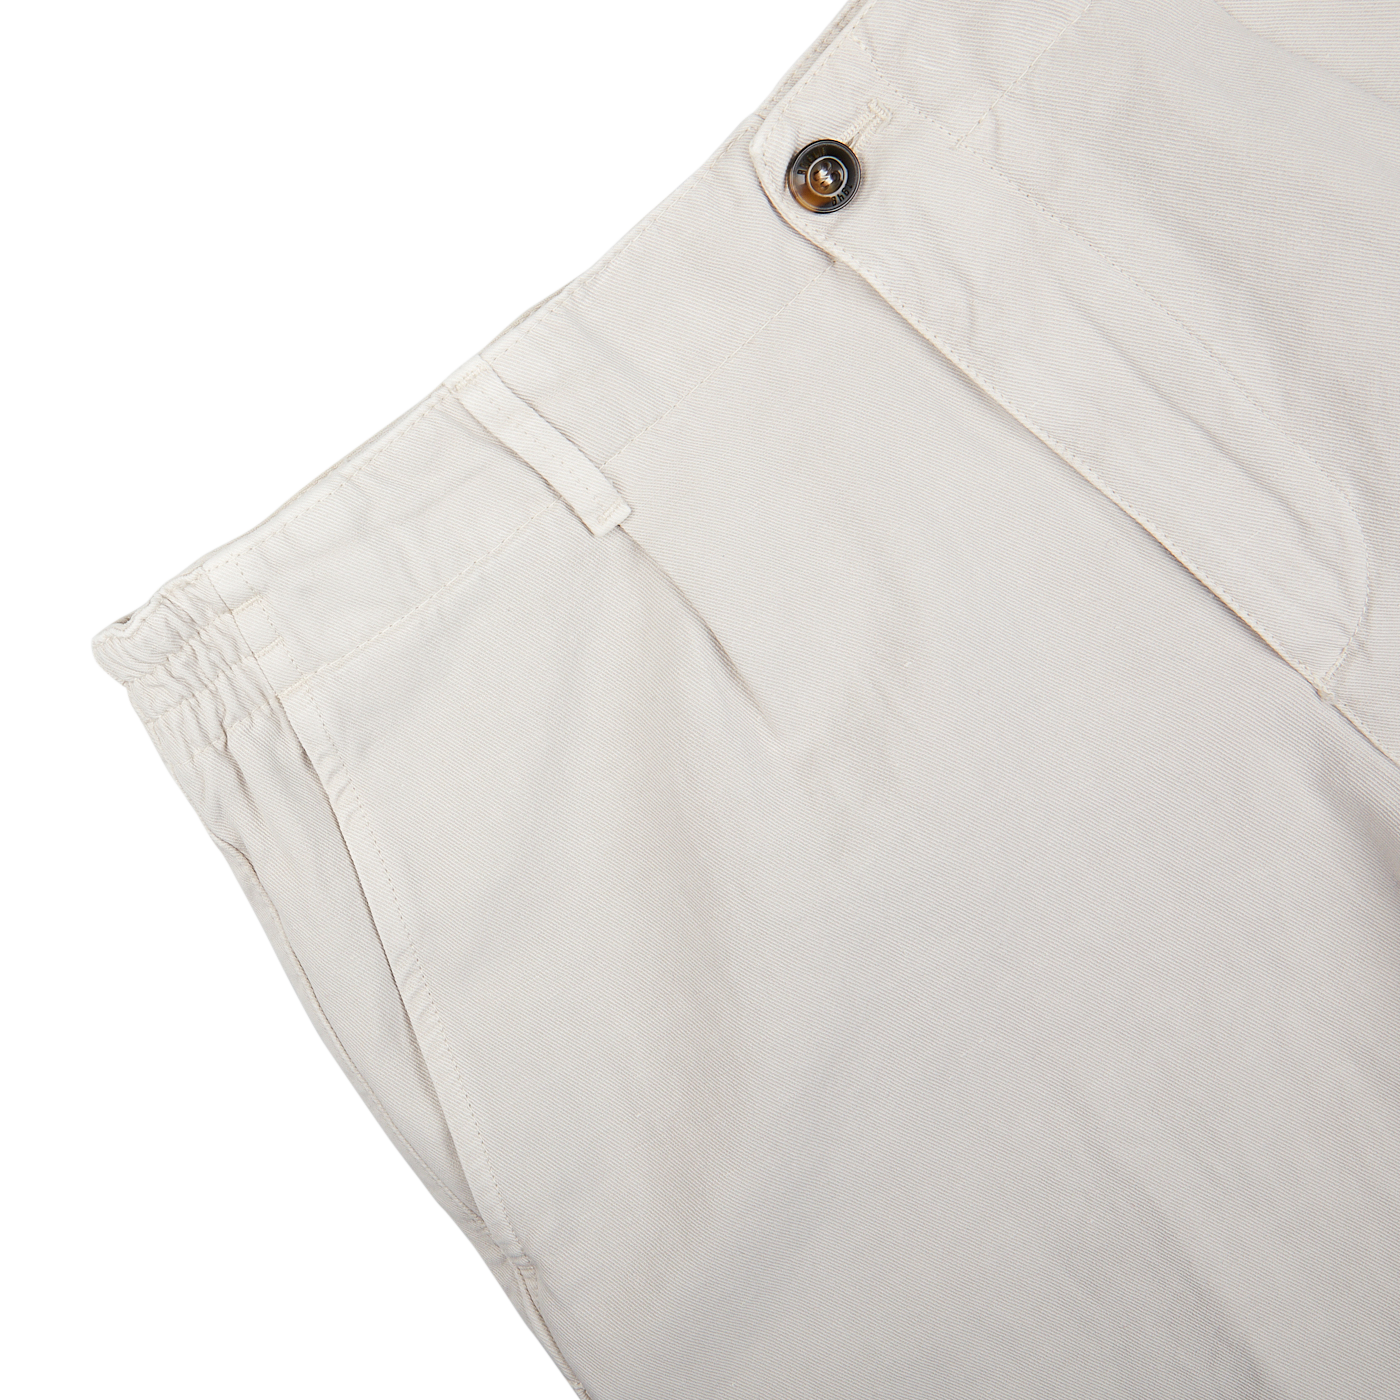 Stone Beige Cotton Linen Pleated Shorts by Briglia with a focus on the button closure.